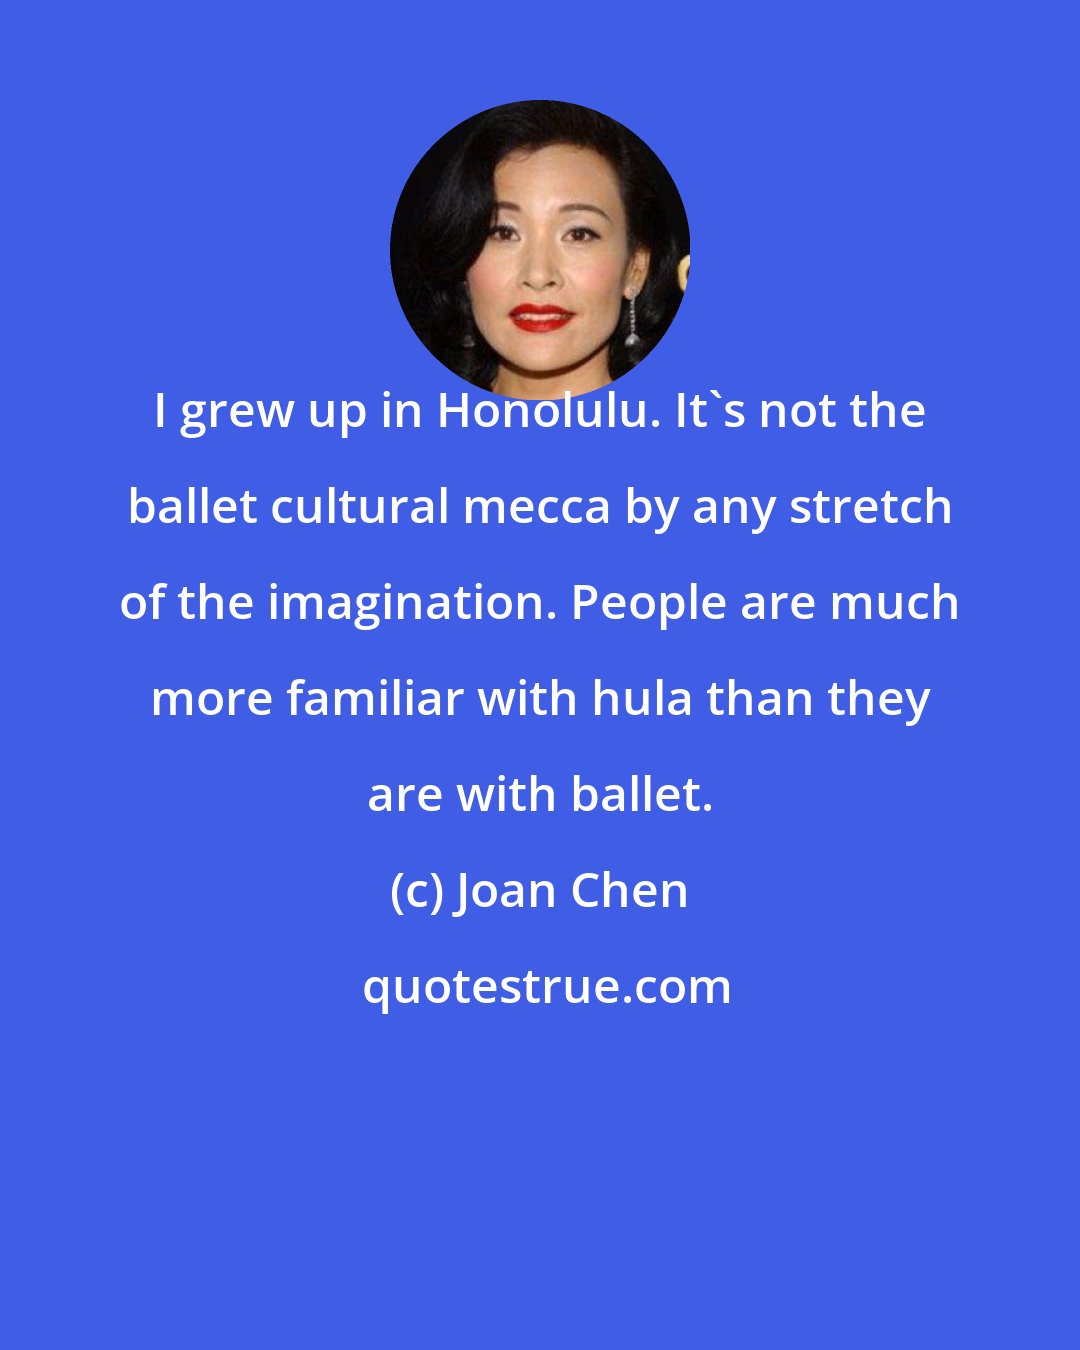 Joan Chen: I grew up in Honolulu. It's not the ballet cultural mecca by any stretch of the imagination. People are much more familiar with hula than they are with ballet.